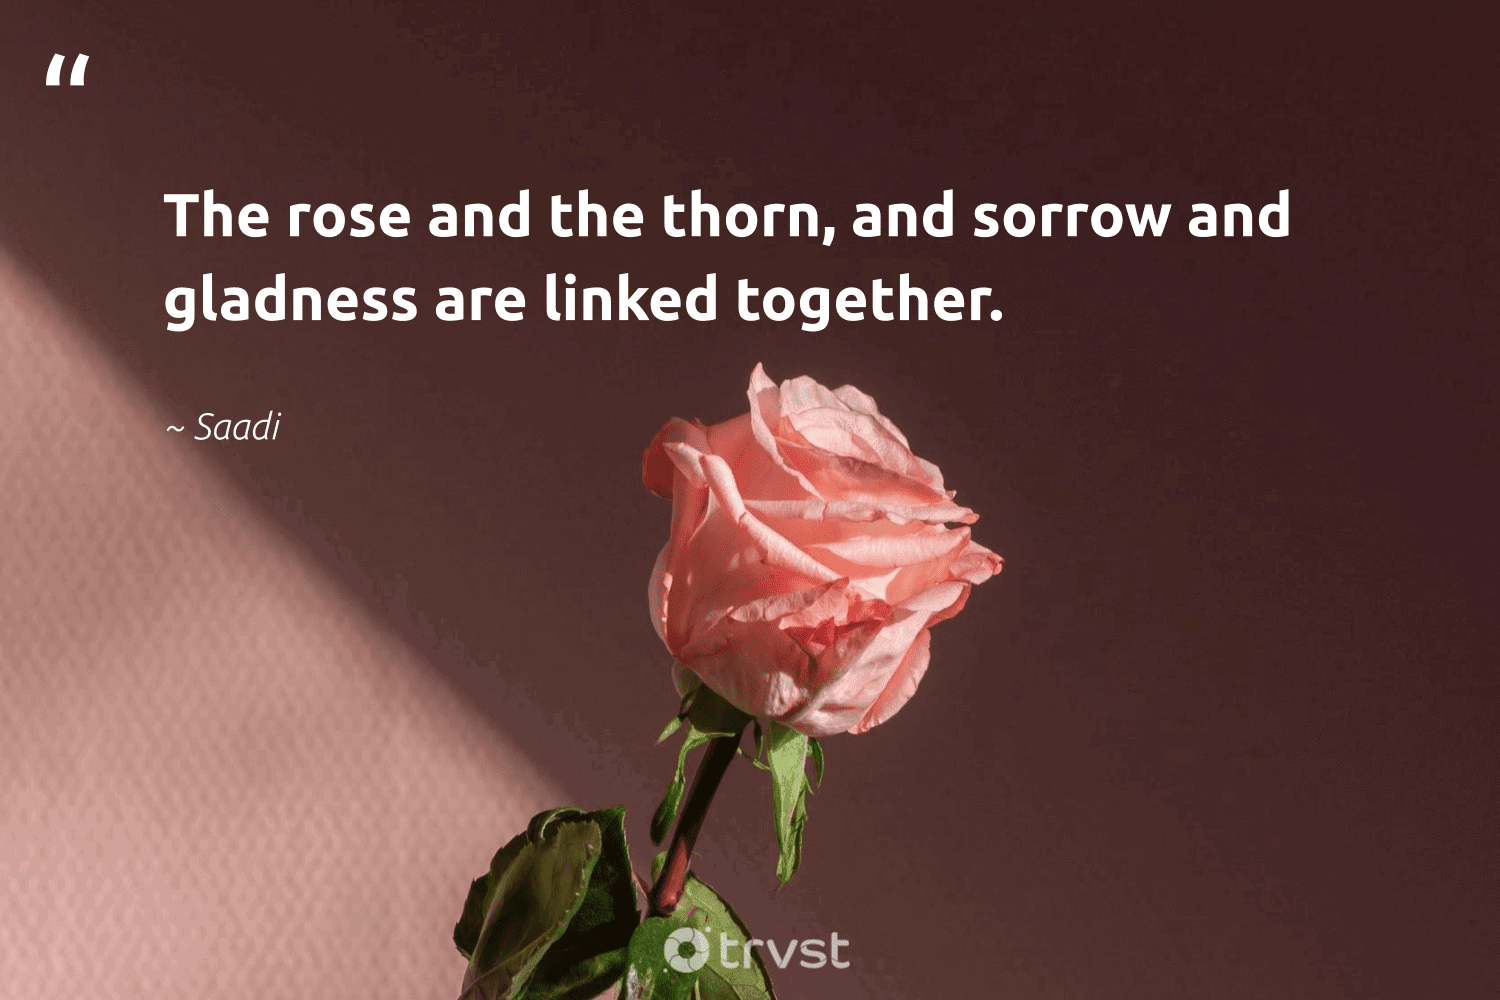 Inspirational Quotes About Roses The Rose And The Thorn, And Sorrow And Gladness